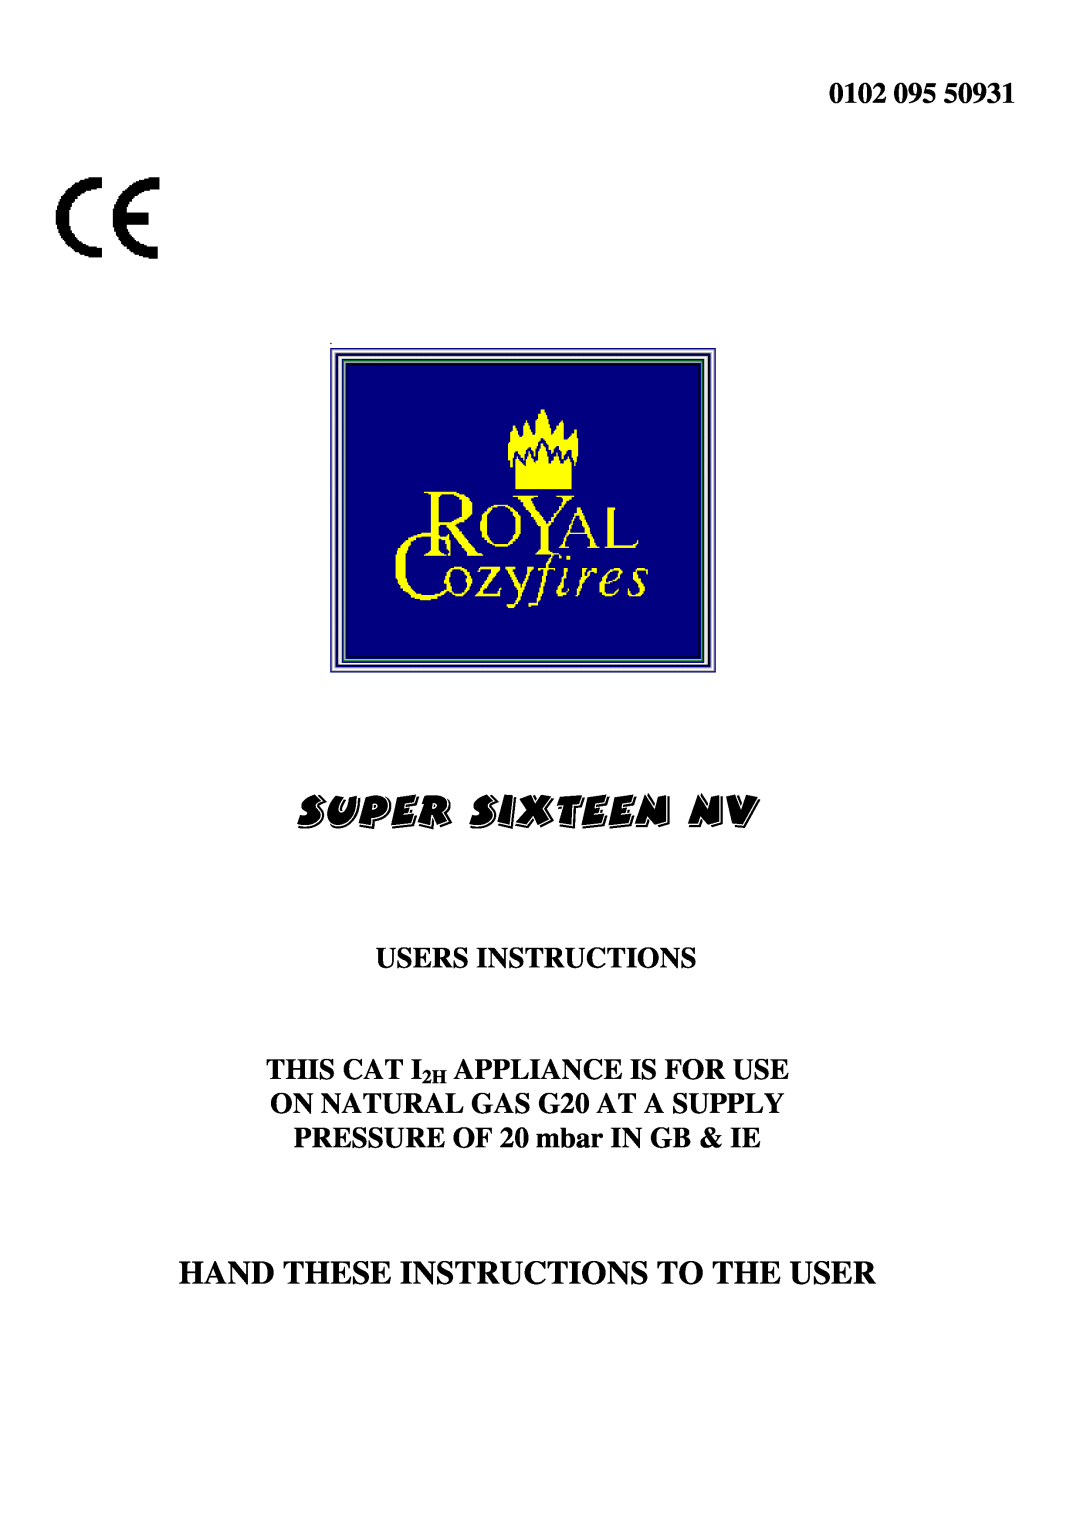 Royal Consumer Information Products Decorative Gas Fireplace manual 68356, Hand These Instructions To The User, 0102 